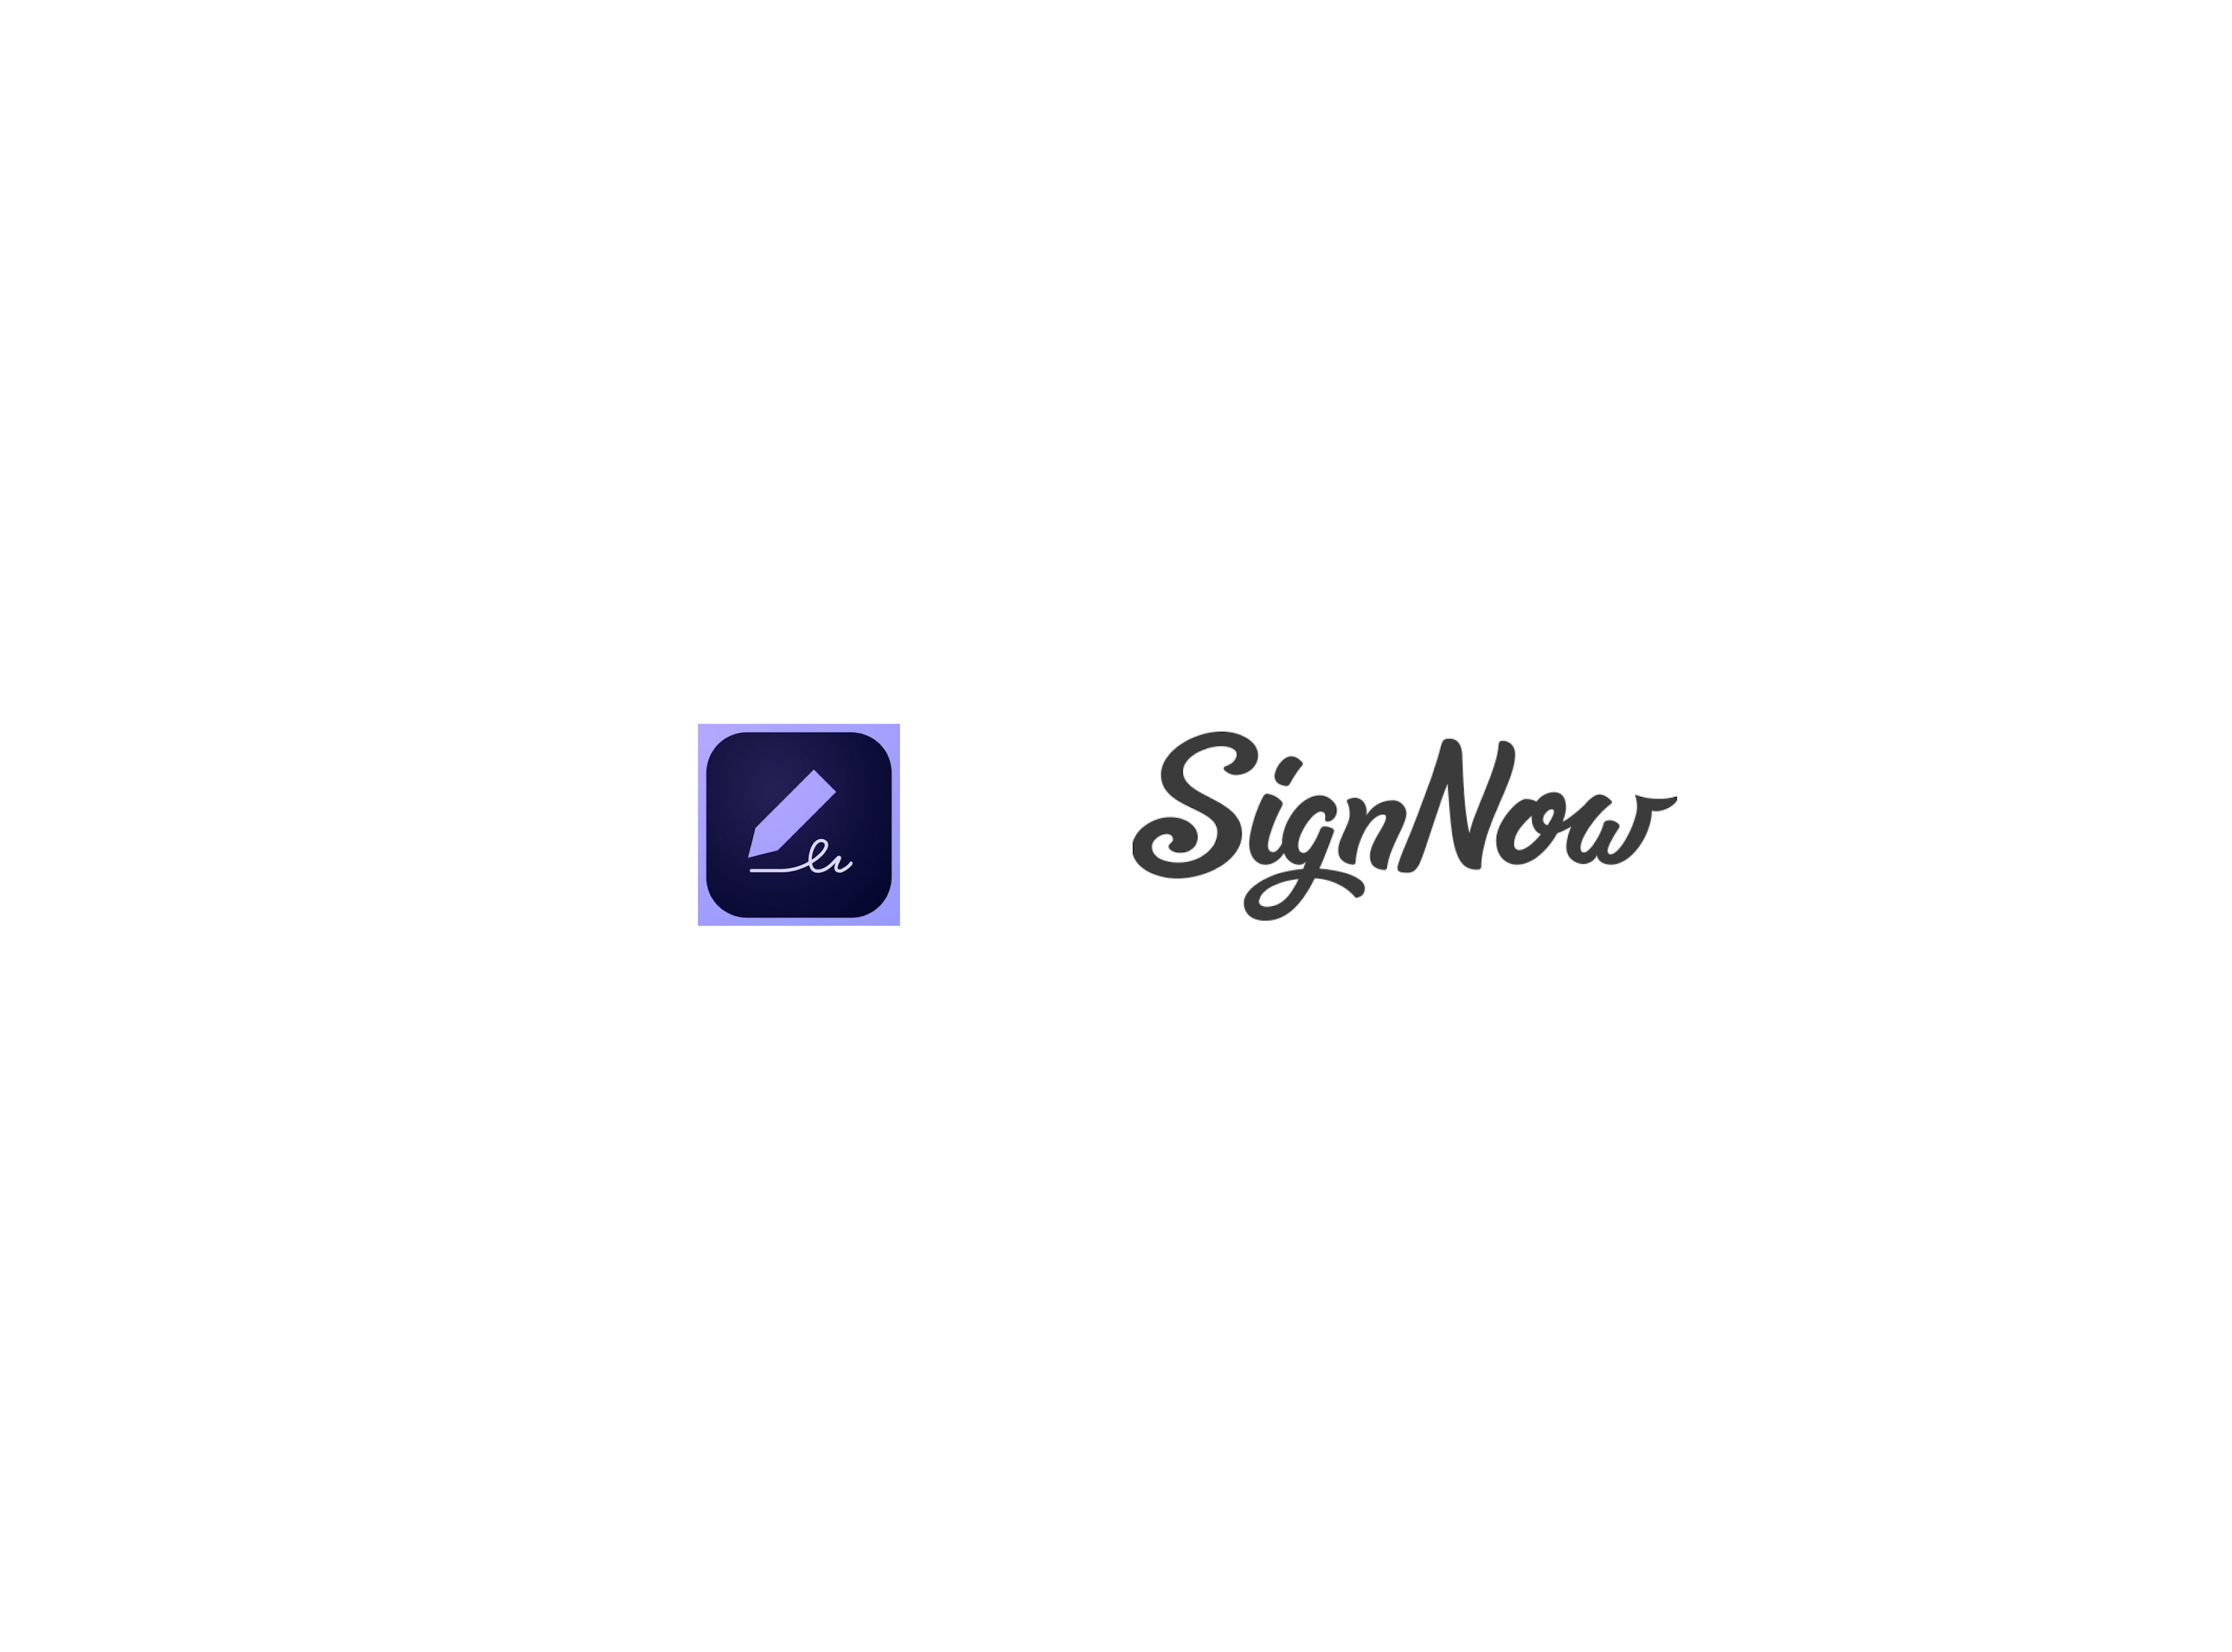 Adobe Fill and Sign vs Sign Now